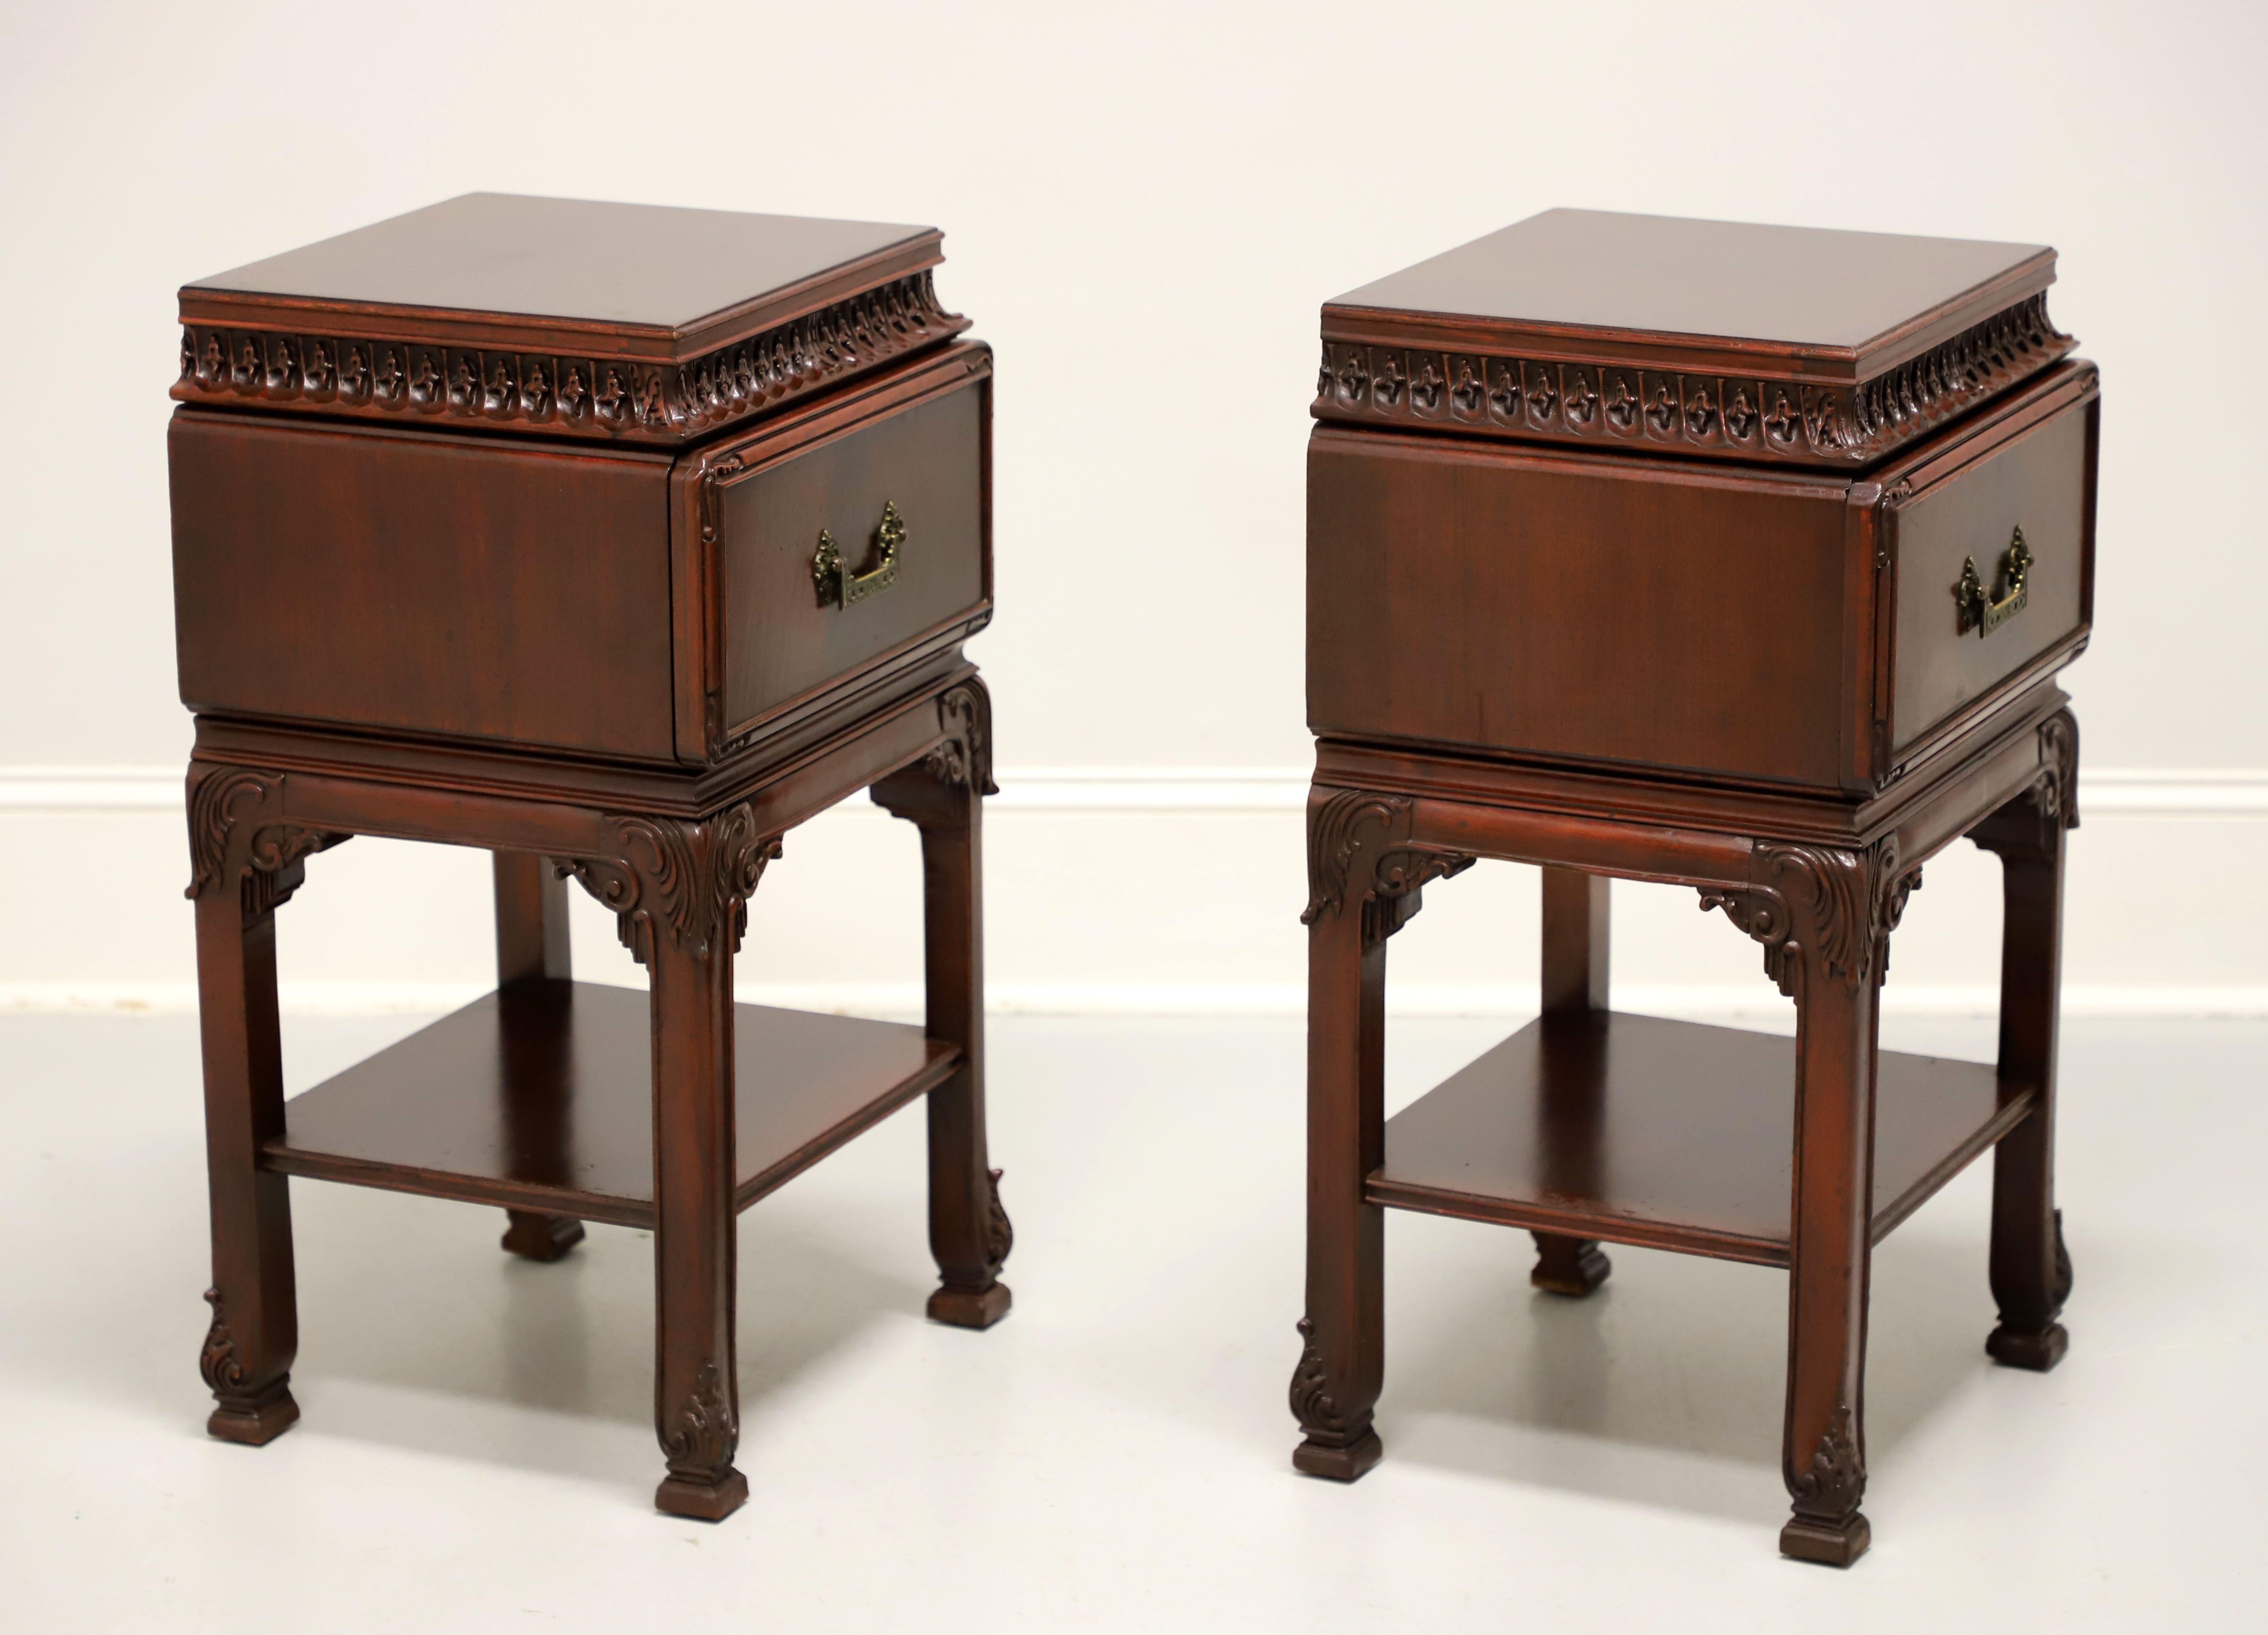 A pair of Asian influenced nightstands, unbranded, similar quality to Kindel or Rway. Mahogany with flame mahogany drawer fronts & top, bevel edge to top, decorative brass hardware, distinctive Asian styling, intricately carved under the top, carved